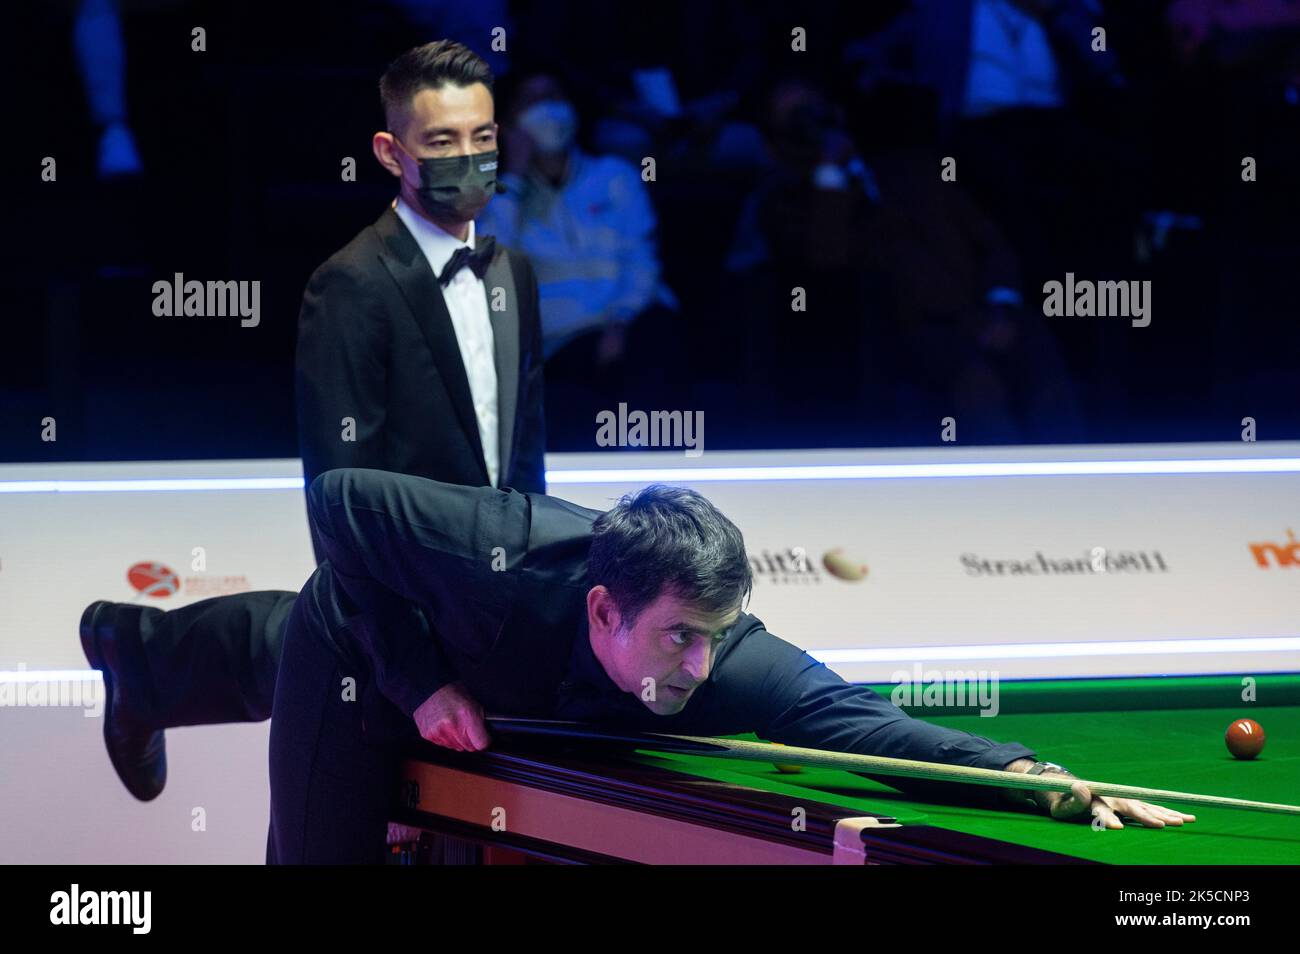 Hong Kong, China. 07th Oct, 2022. Current world champion and world number one English player Ronnie O'Sullivan seen in action during the fourth quarter-final match of Hong Kong Masters snooker tournament against Hongkonger Ng On Yee. Final score; Ronnie O'Sullivan 5:0 Ng On Yee. Credit: SOPA Images Limited/Alamy Live News Stock Photo